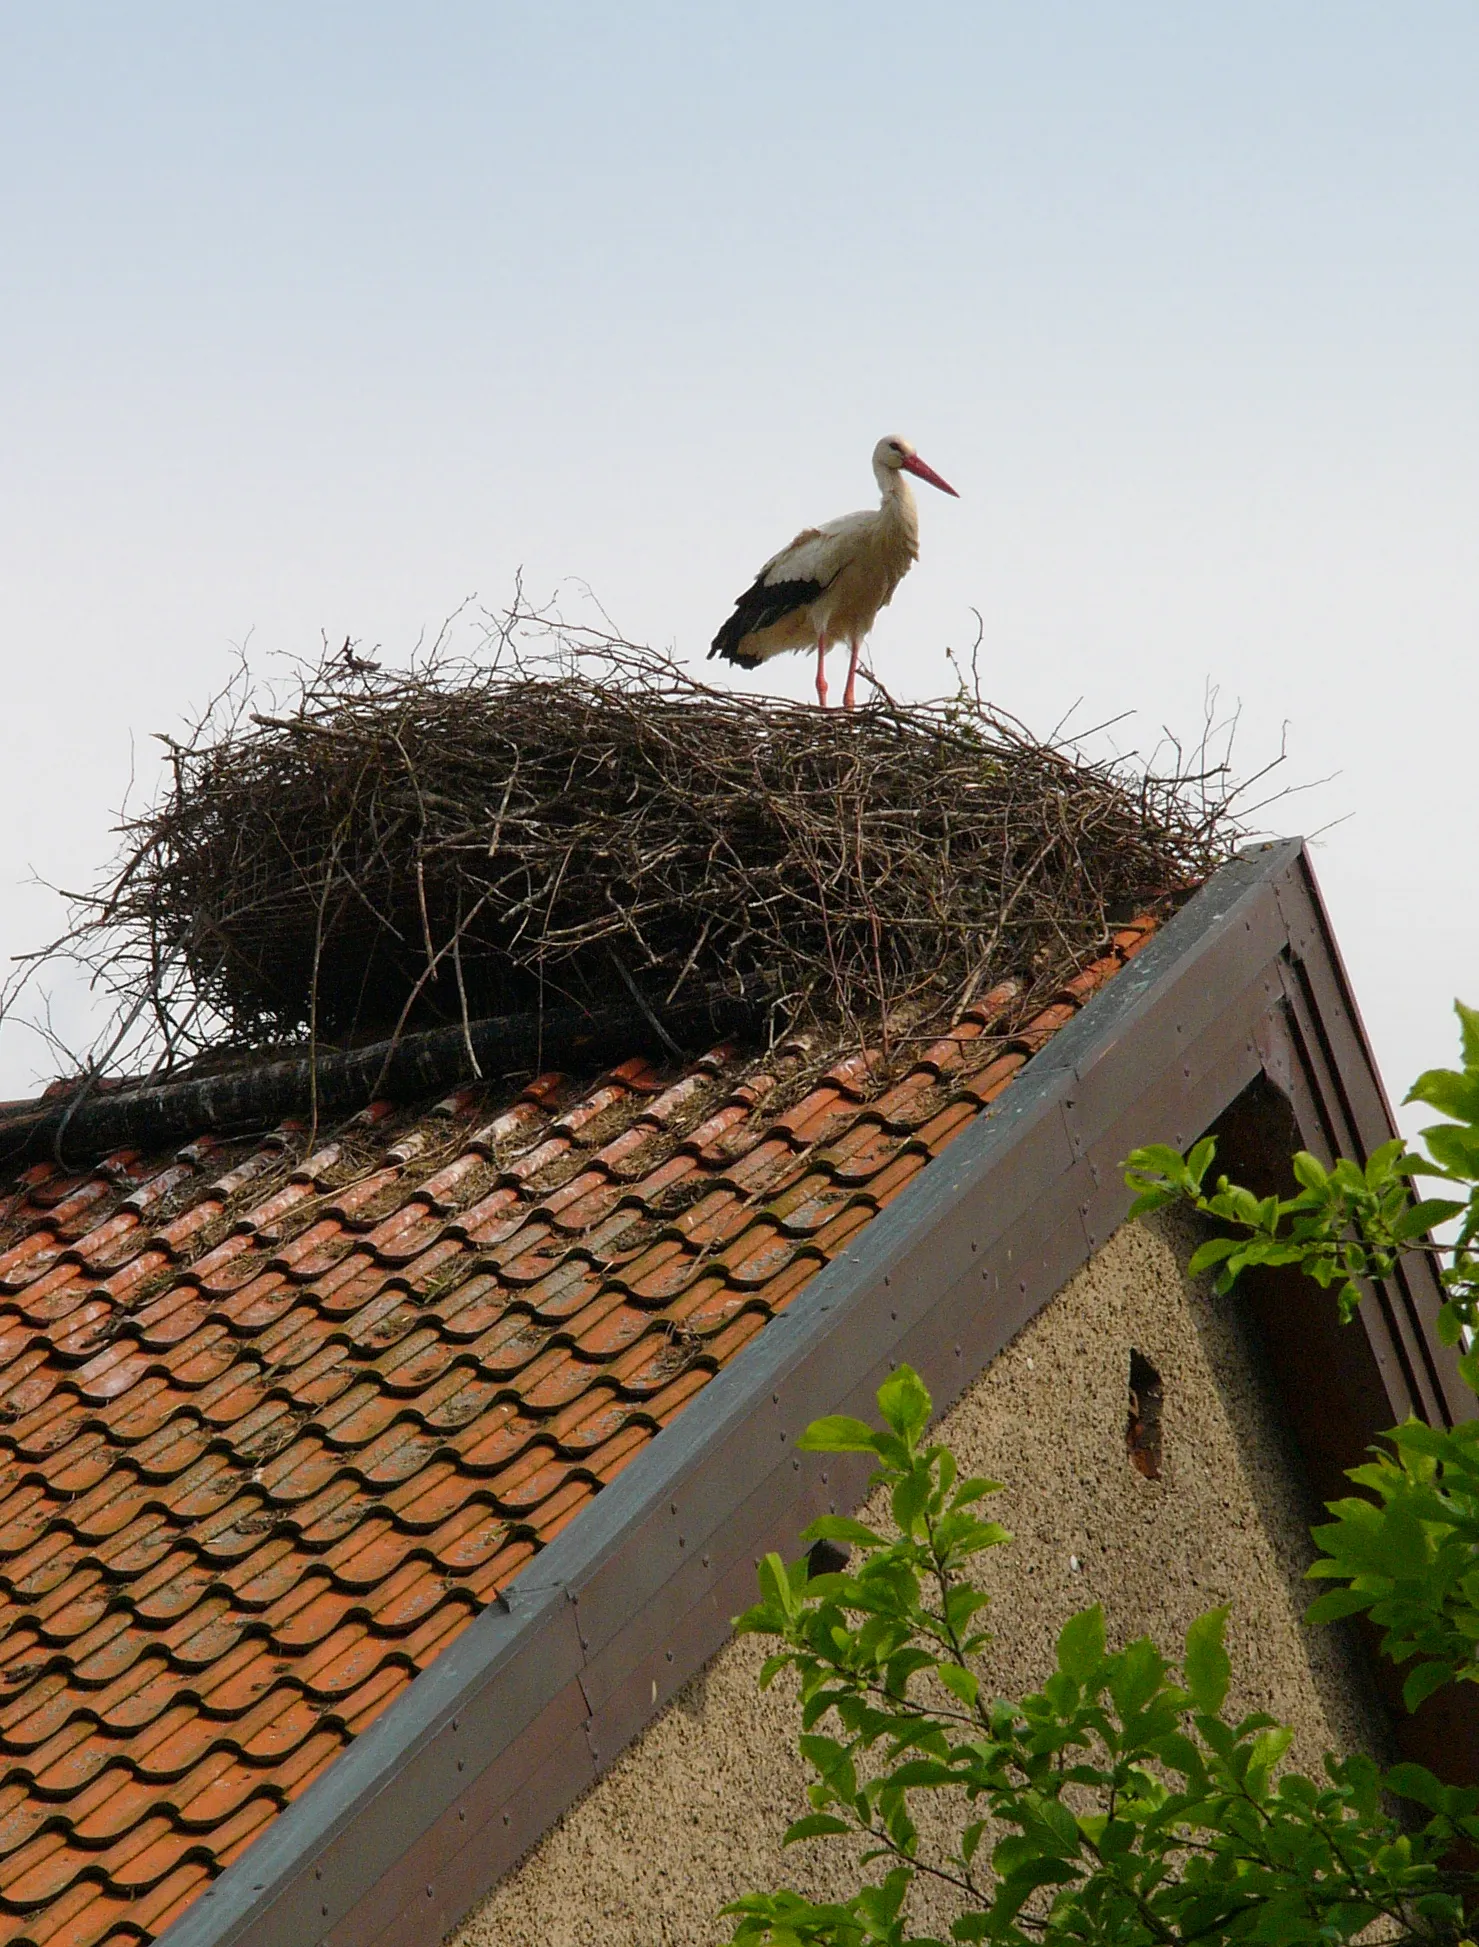 Photo showing: Breeding White Stork (Ciconia ciconia) in its nest near Blomberg, Lippe District, North Rhine-Westphalia, Germany.